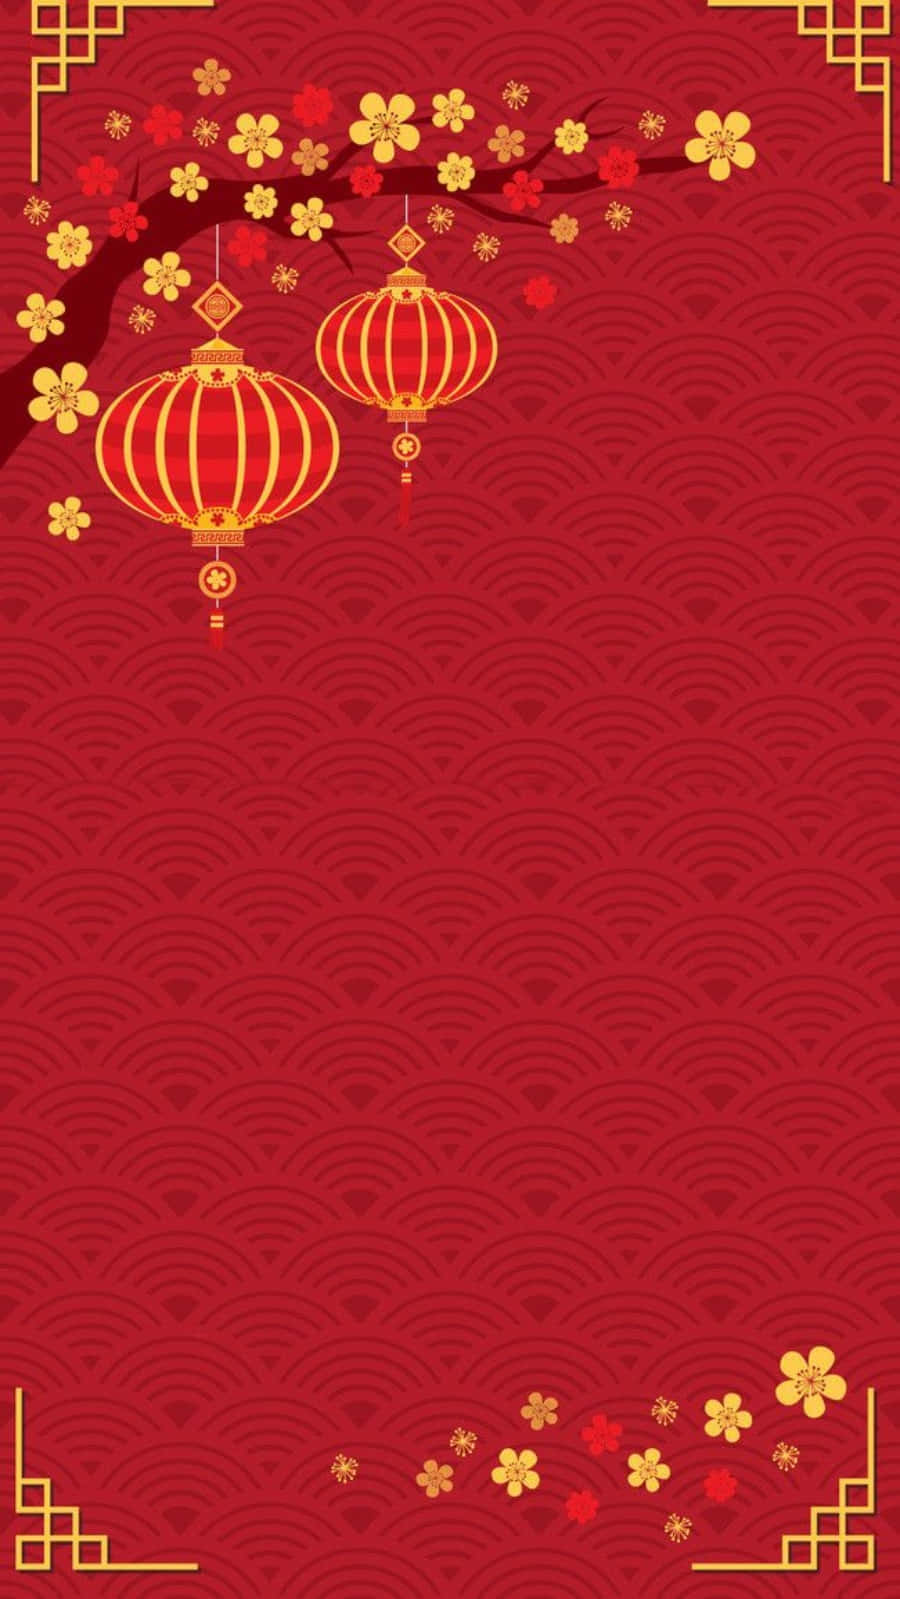 Celebrate Chinese New Year with the Latest iPhone Wallpaper